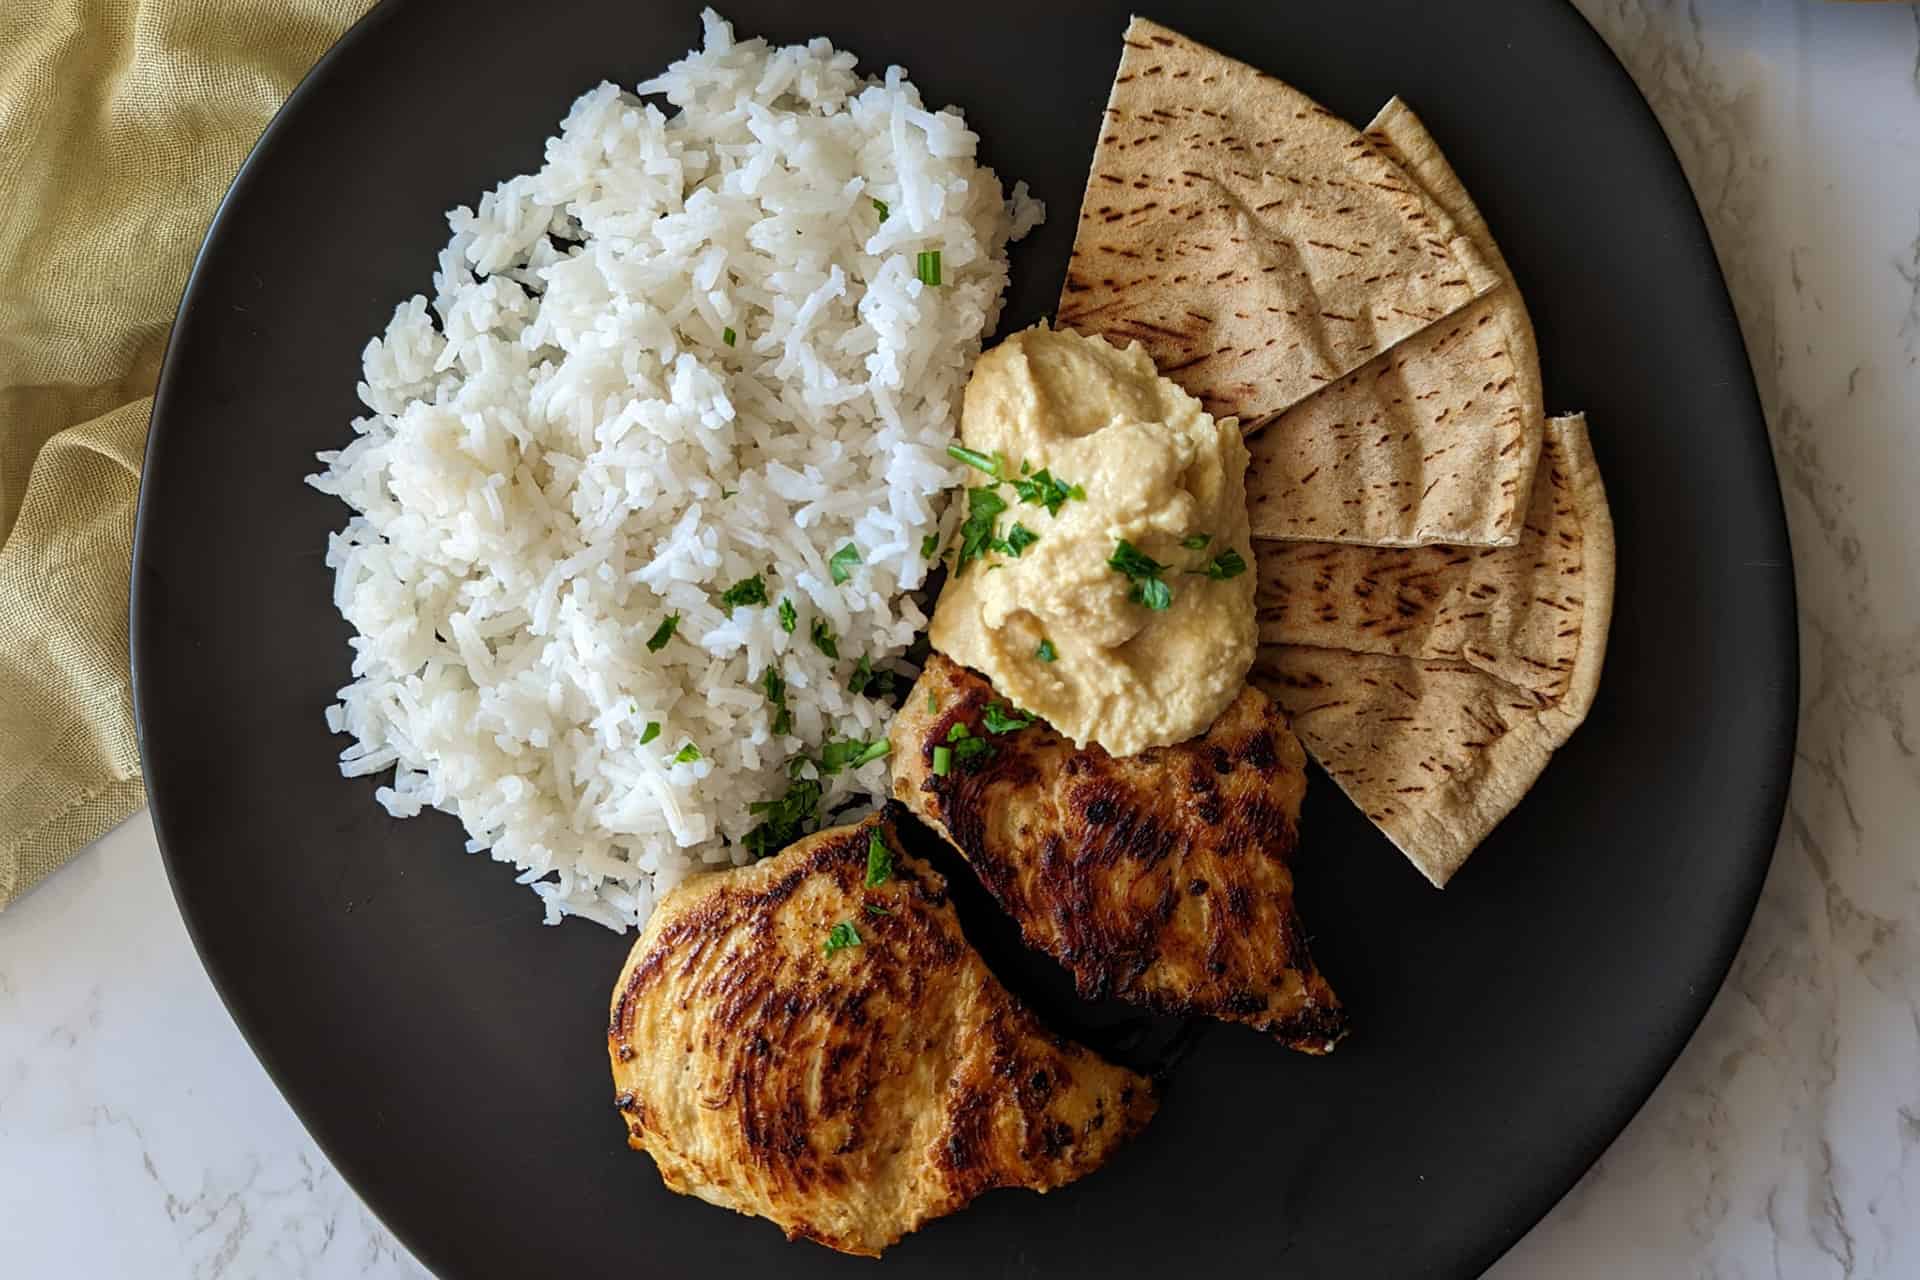 Mediterranean chicken and rice with hummus and pita